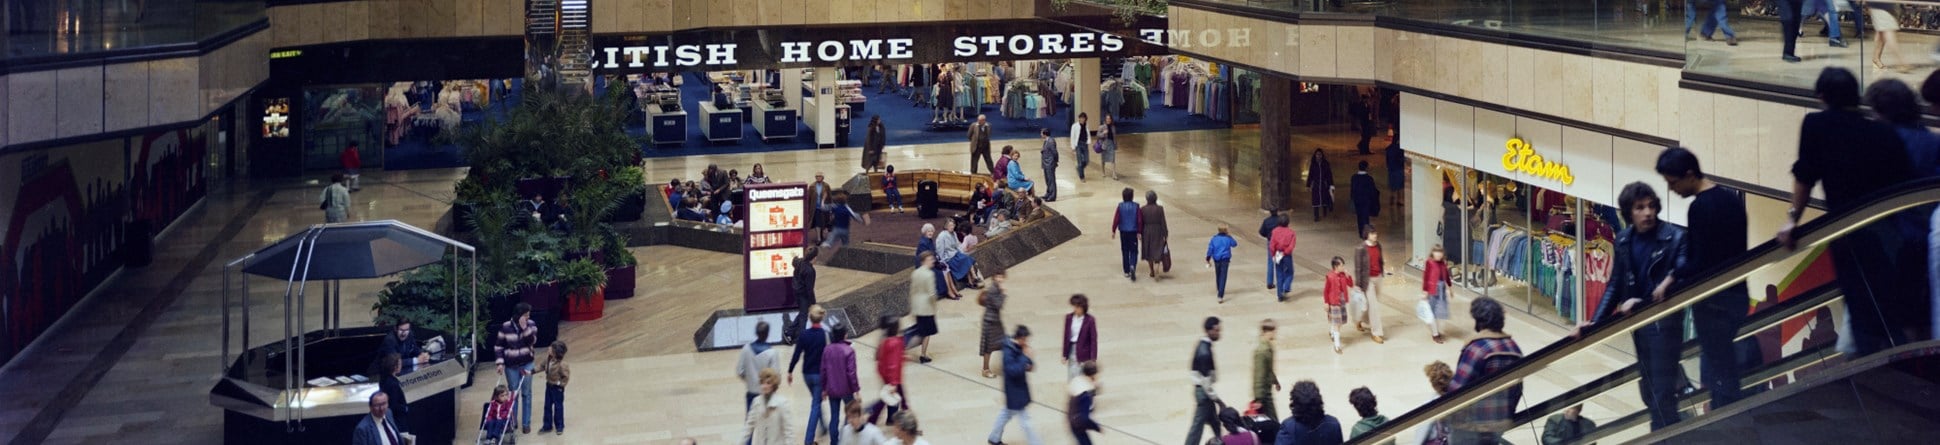 Colour photograph showing shoppers inside Queensgate shopping centre. The two levels of British Home Stores are in the background. On the right, shoppers are riding down an escalator into a large central square.